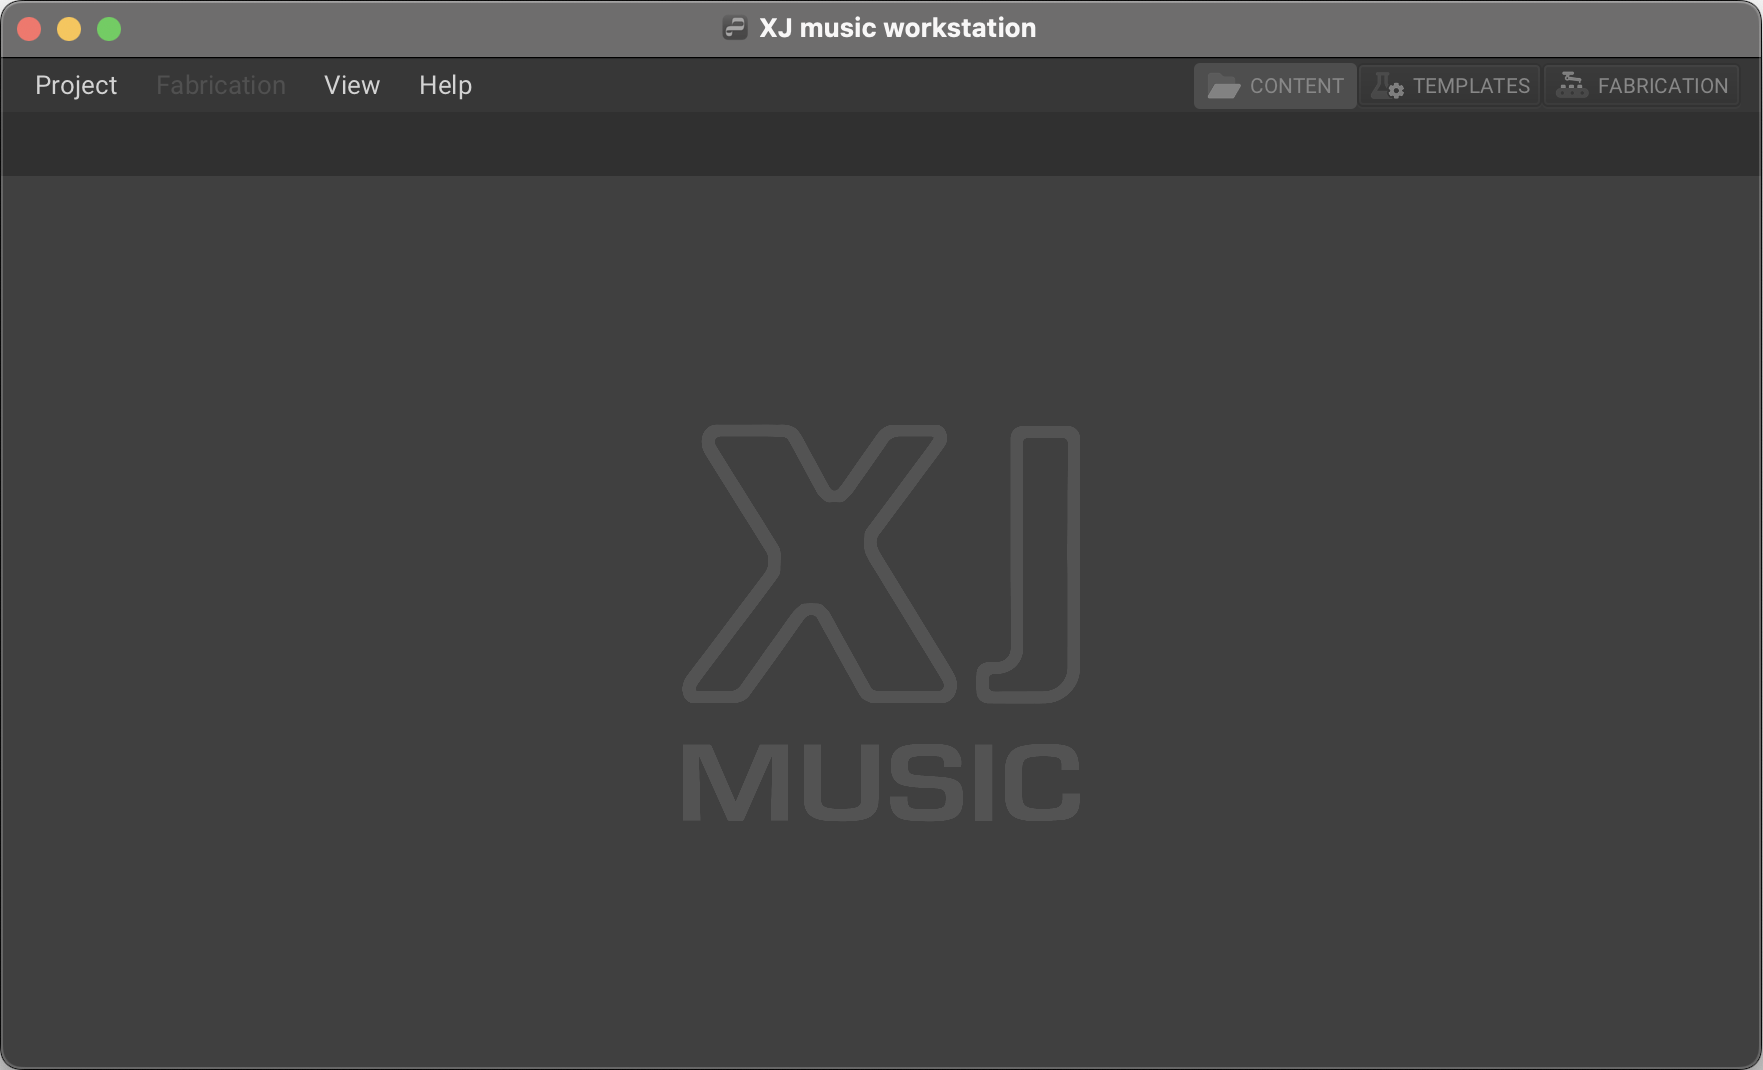 XJ music workstation first opens